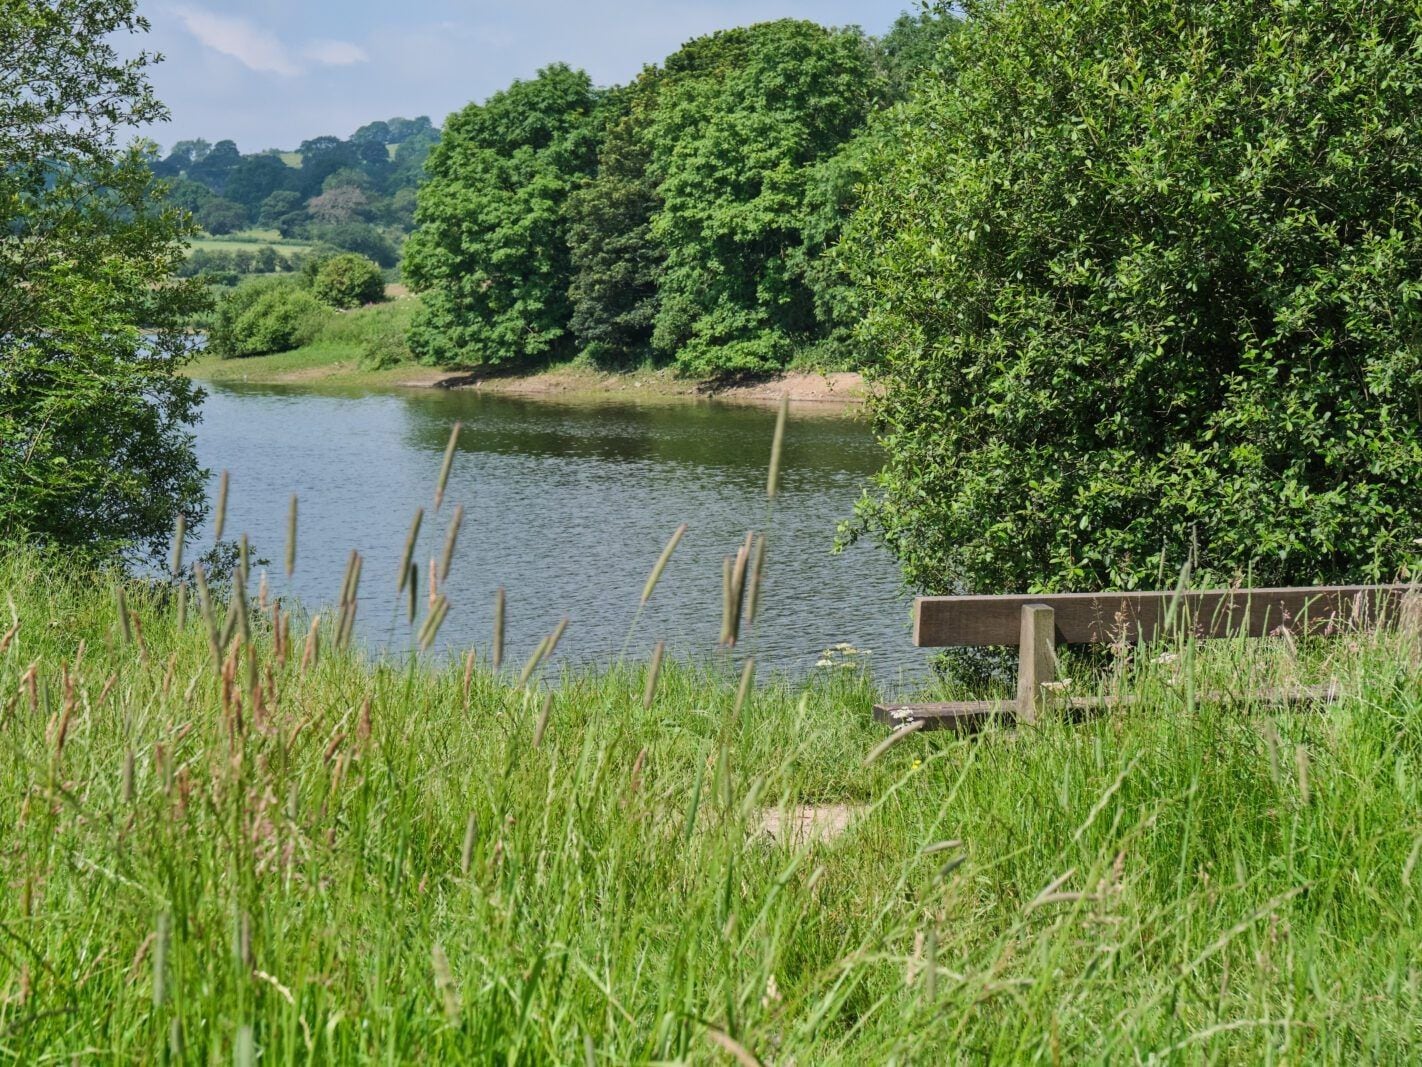 Stay safe at Severn Trent’s reservoirs during the summer holidays